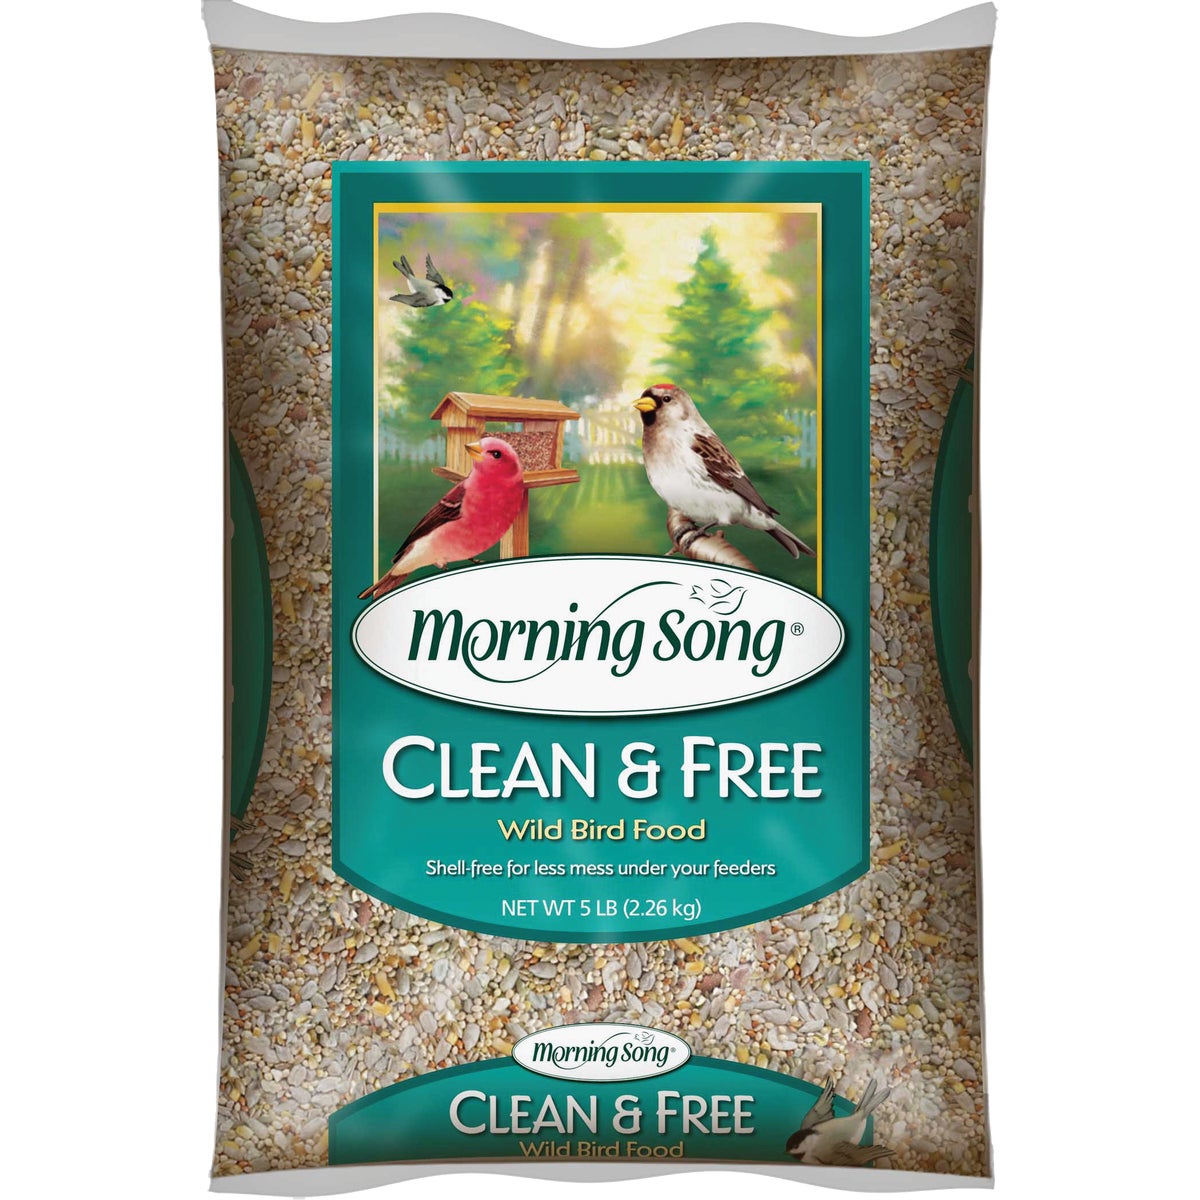 Morning Song 12382 Morning Song 5 Lb. Clean & Free Shell Free Wild Bird Seed 12382